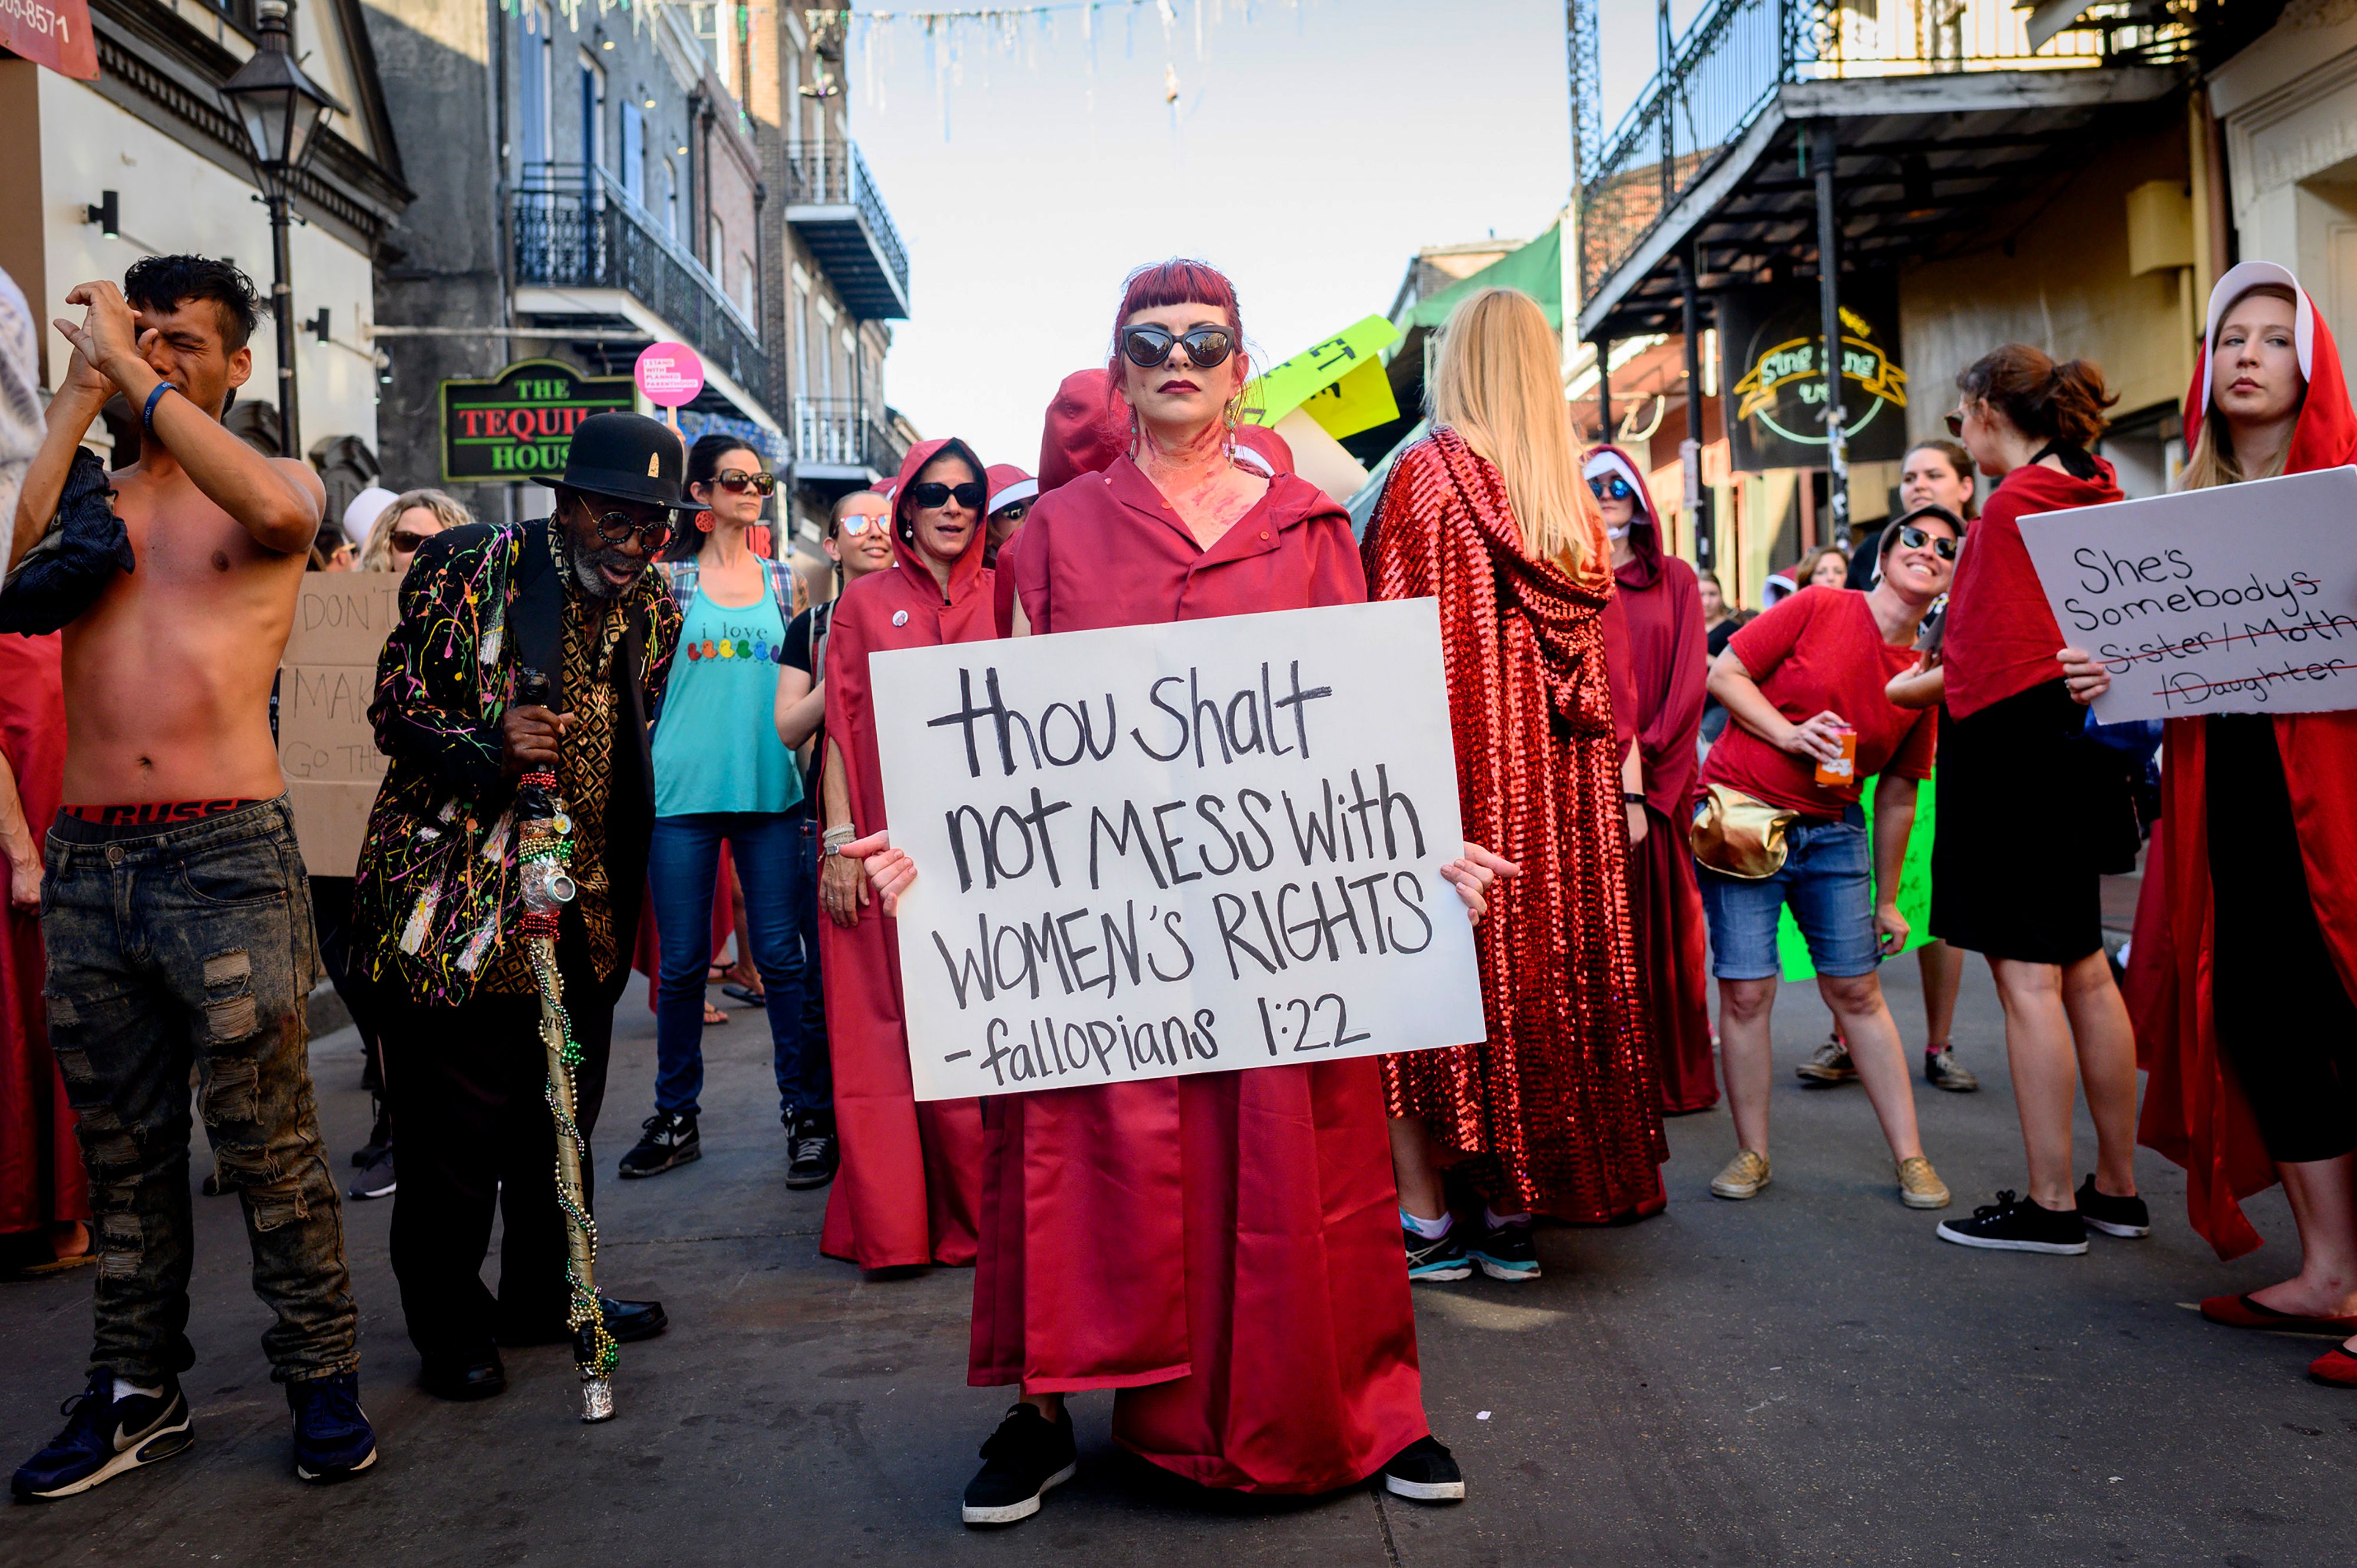 Handsmaid themed protesters march down Bourbon Street in the French Quarter of New Orleans, Louisiana, on May 25, 2019, to protest the proposed Heartbeat Bill that will ban abortion after 6 weeks in that state scheduled for a vote on May 28. (EMILY KASK/AFP/Getty Images)